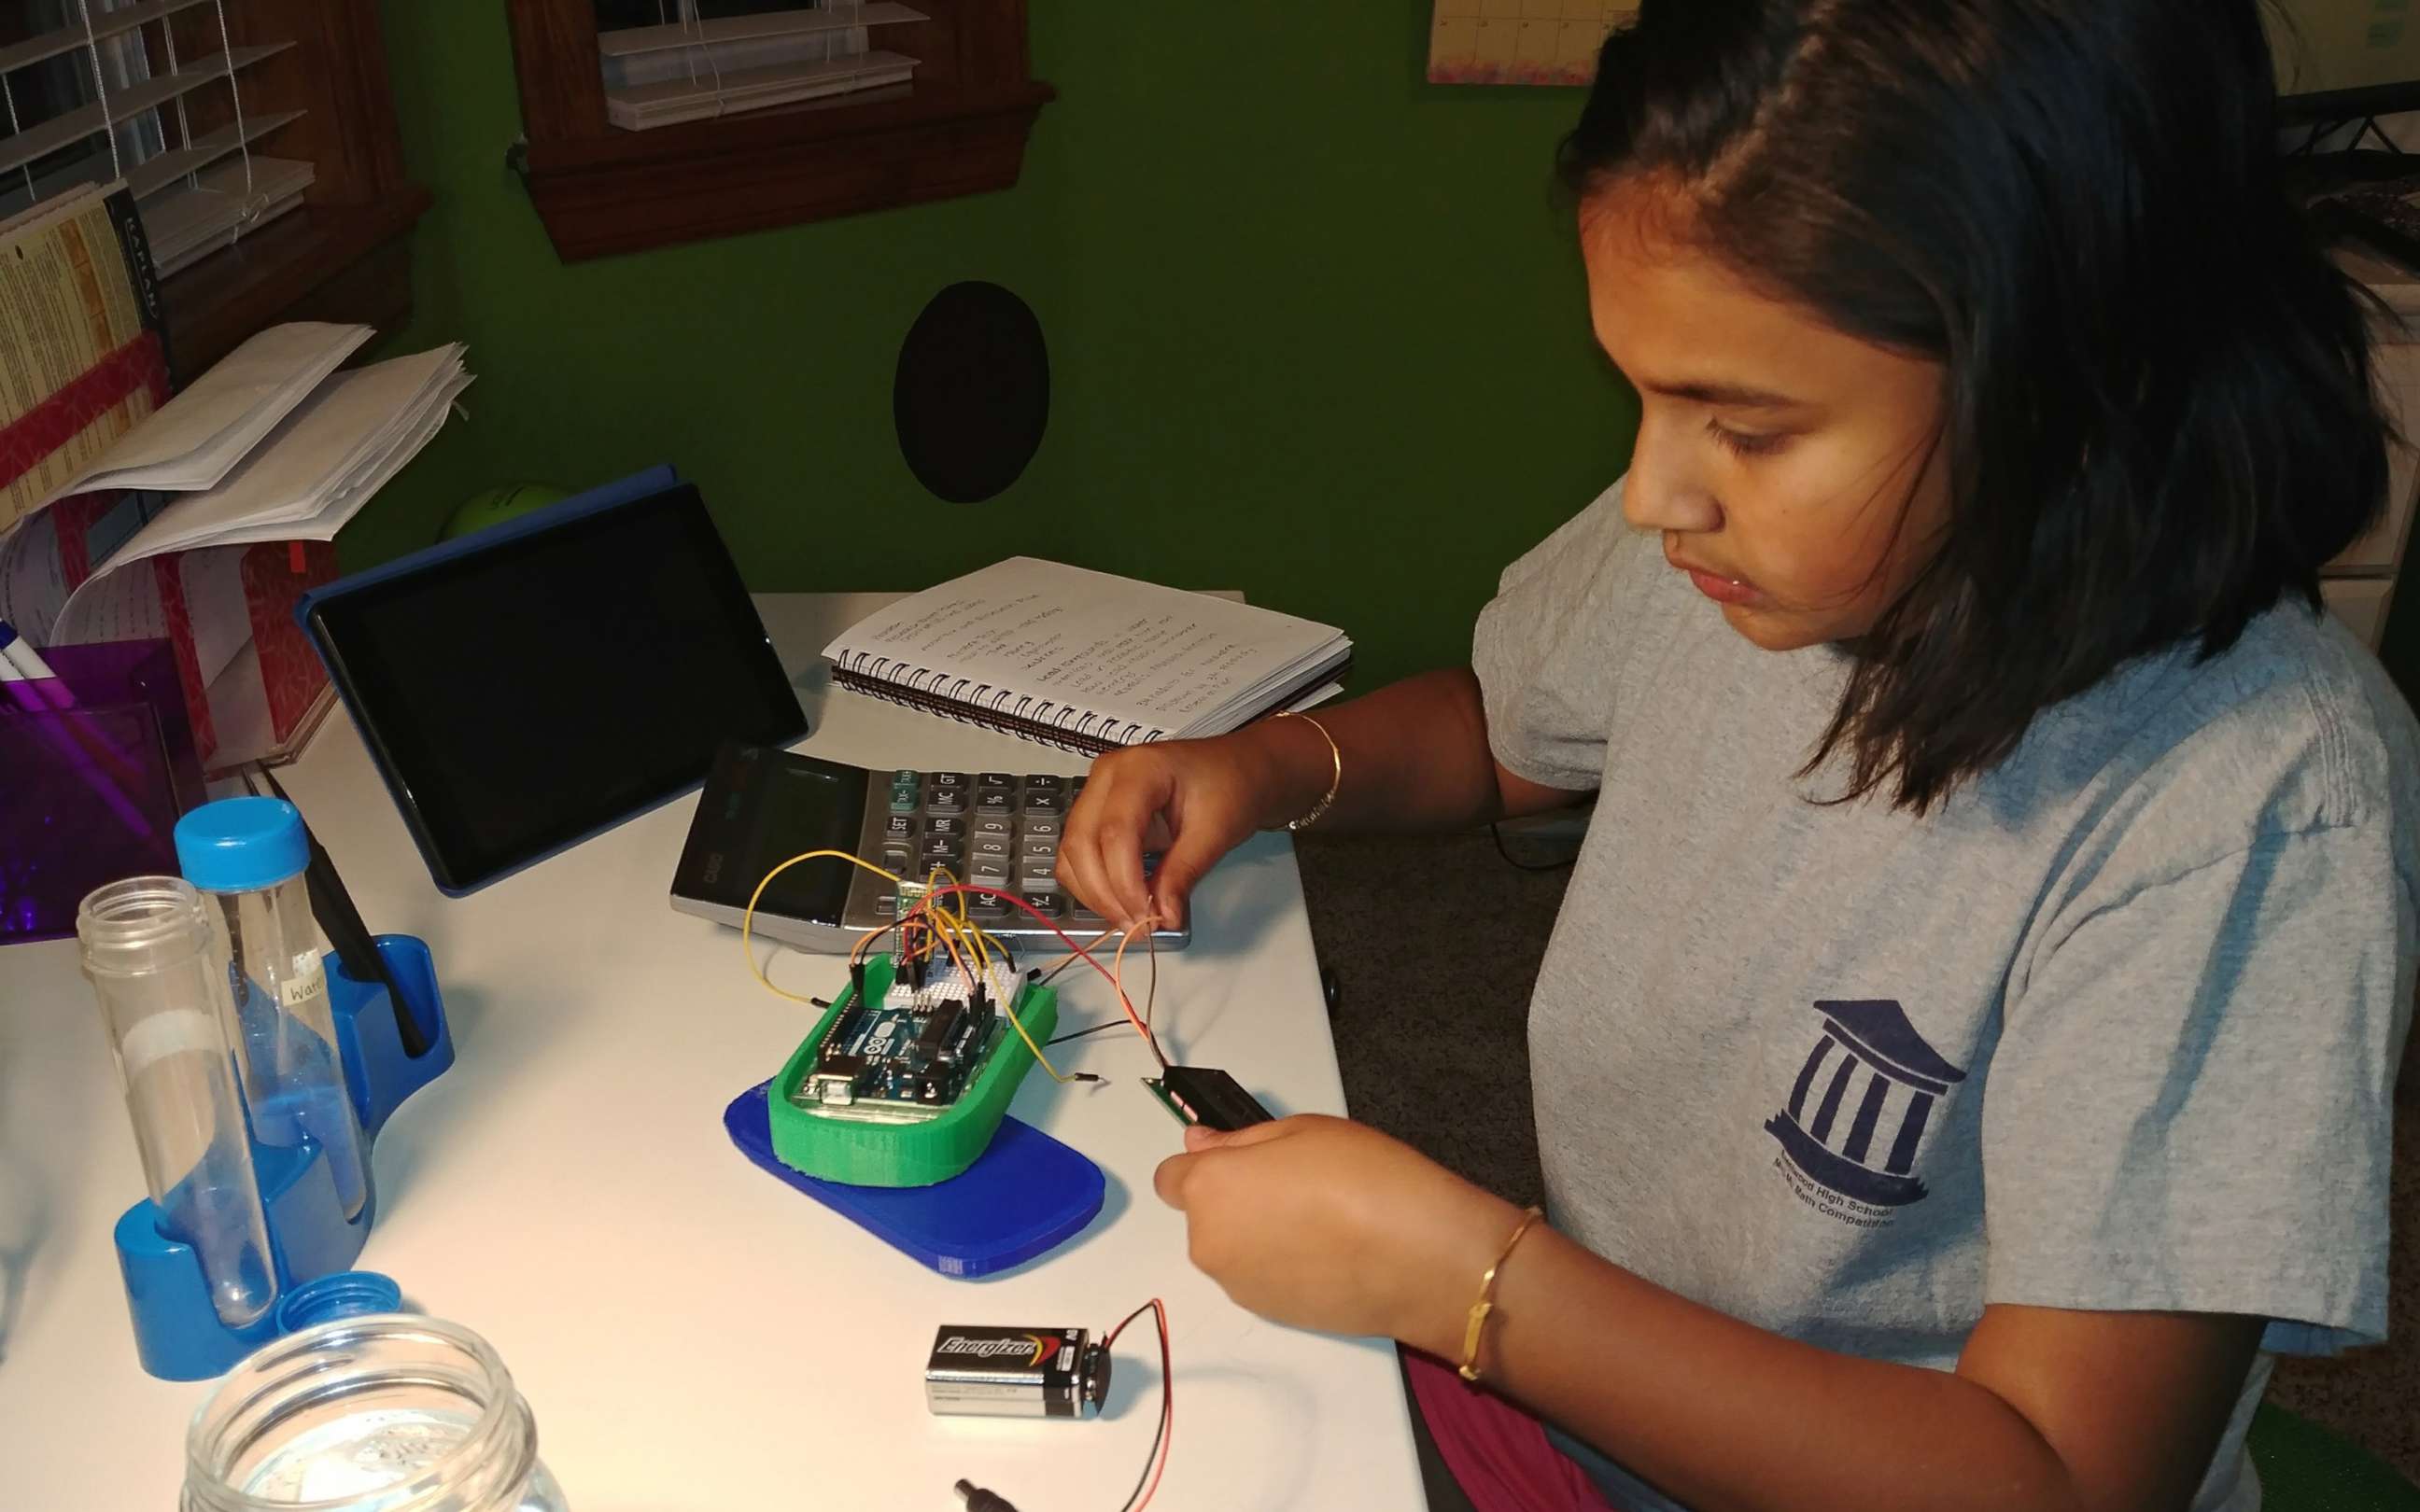 PHOTO: Gitanjali Rao, 11, works on her lead testing device at home in the family's "science room" in Lone Tree, Colo., in an undated handout photo.